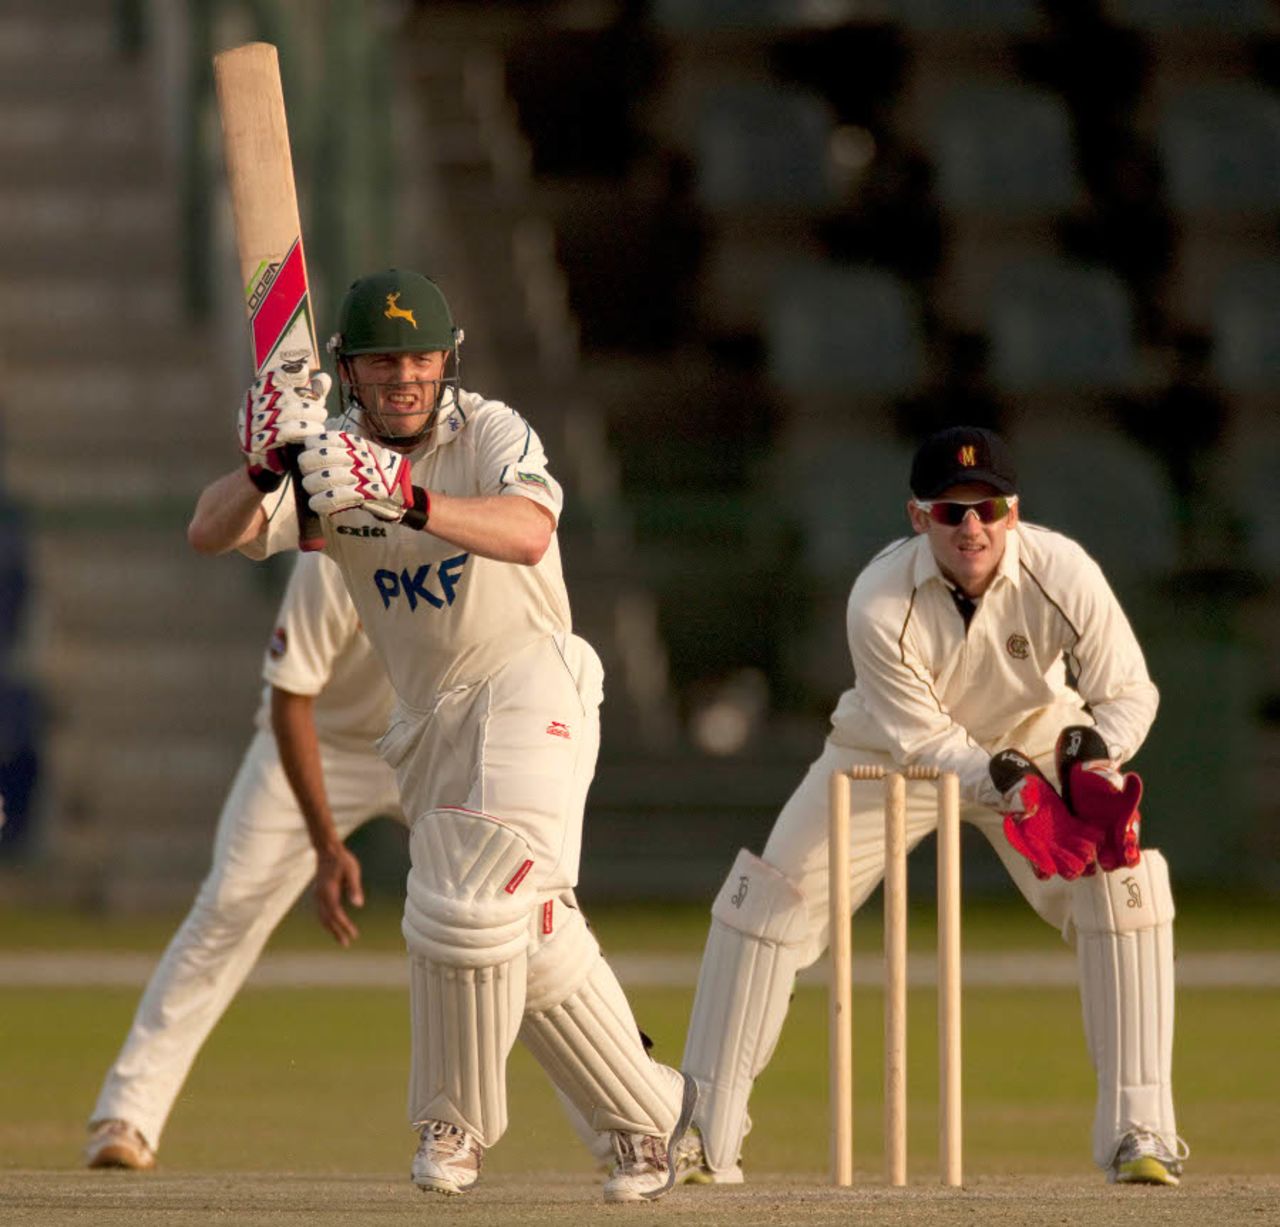 Ali Brown helped give the Nottinghamshire score respectability, MCC v Nottinghamshire, 3rd day, Abu Dhabi, March 29, 2011